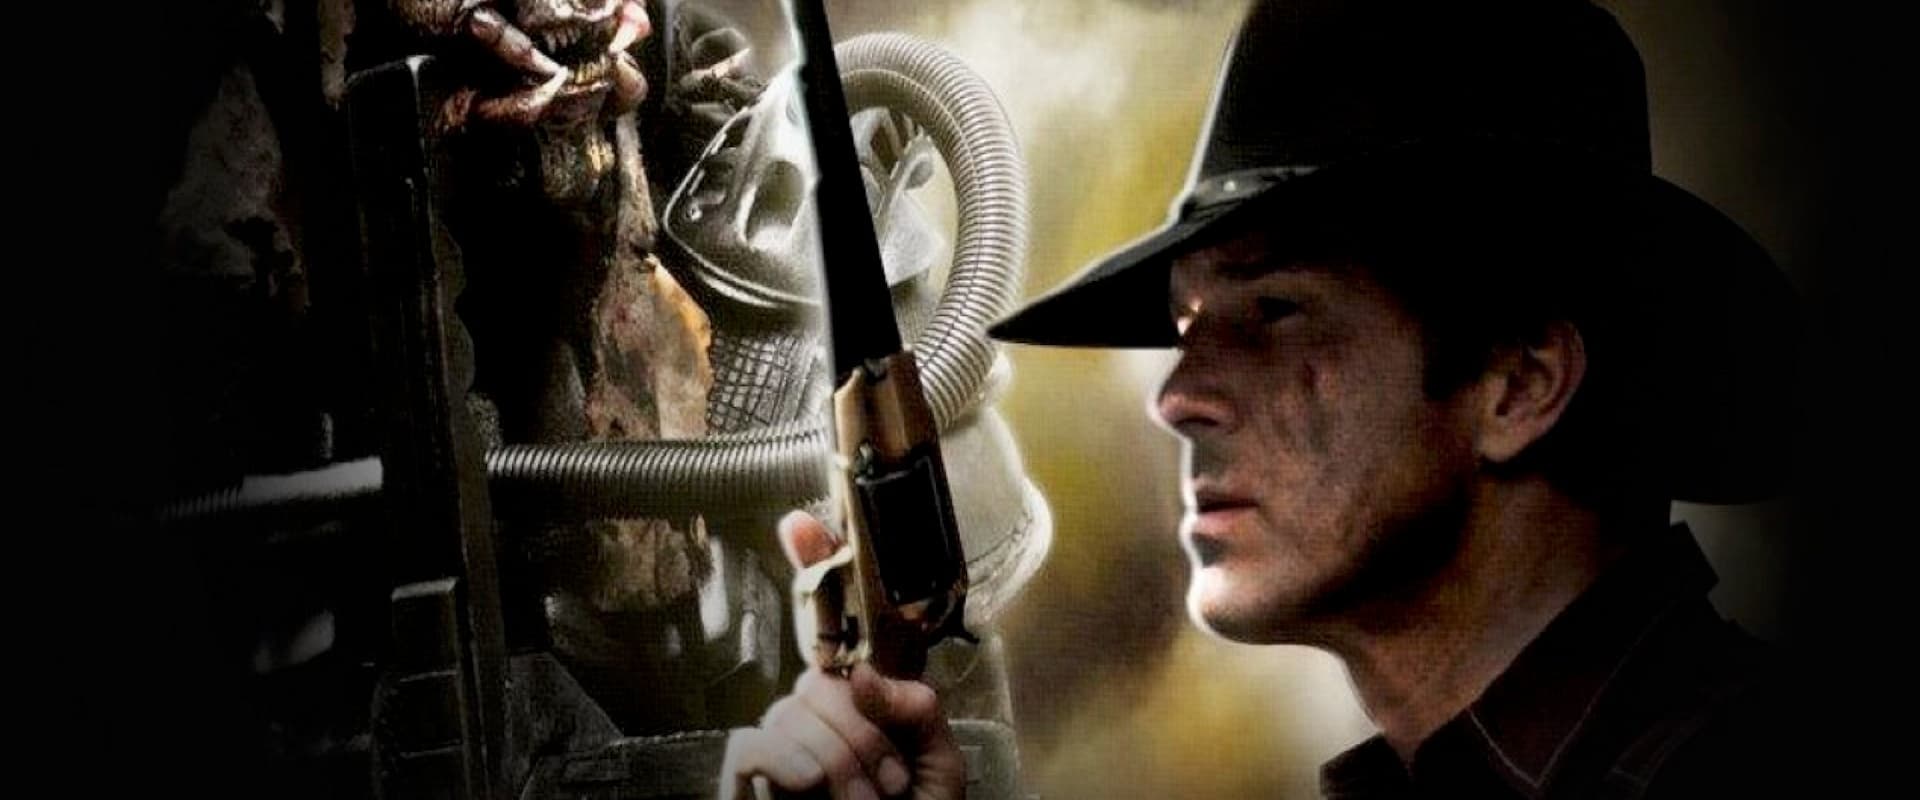 Alien Showdown: The Day the Old West Stood Still